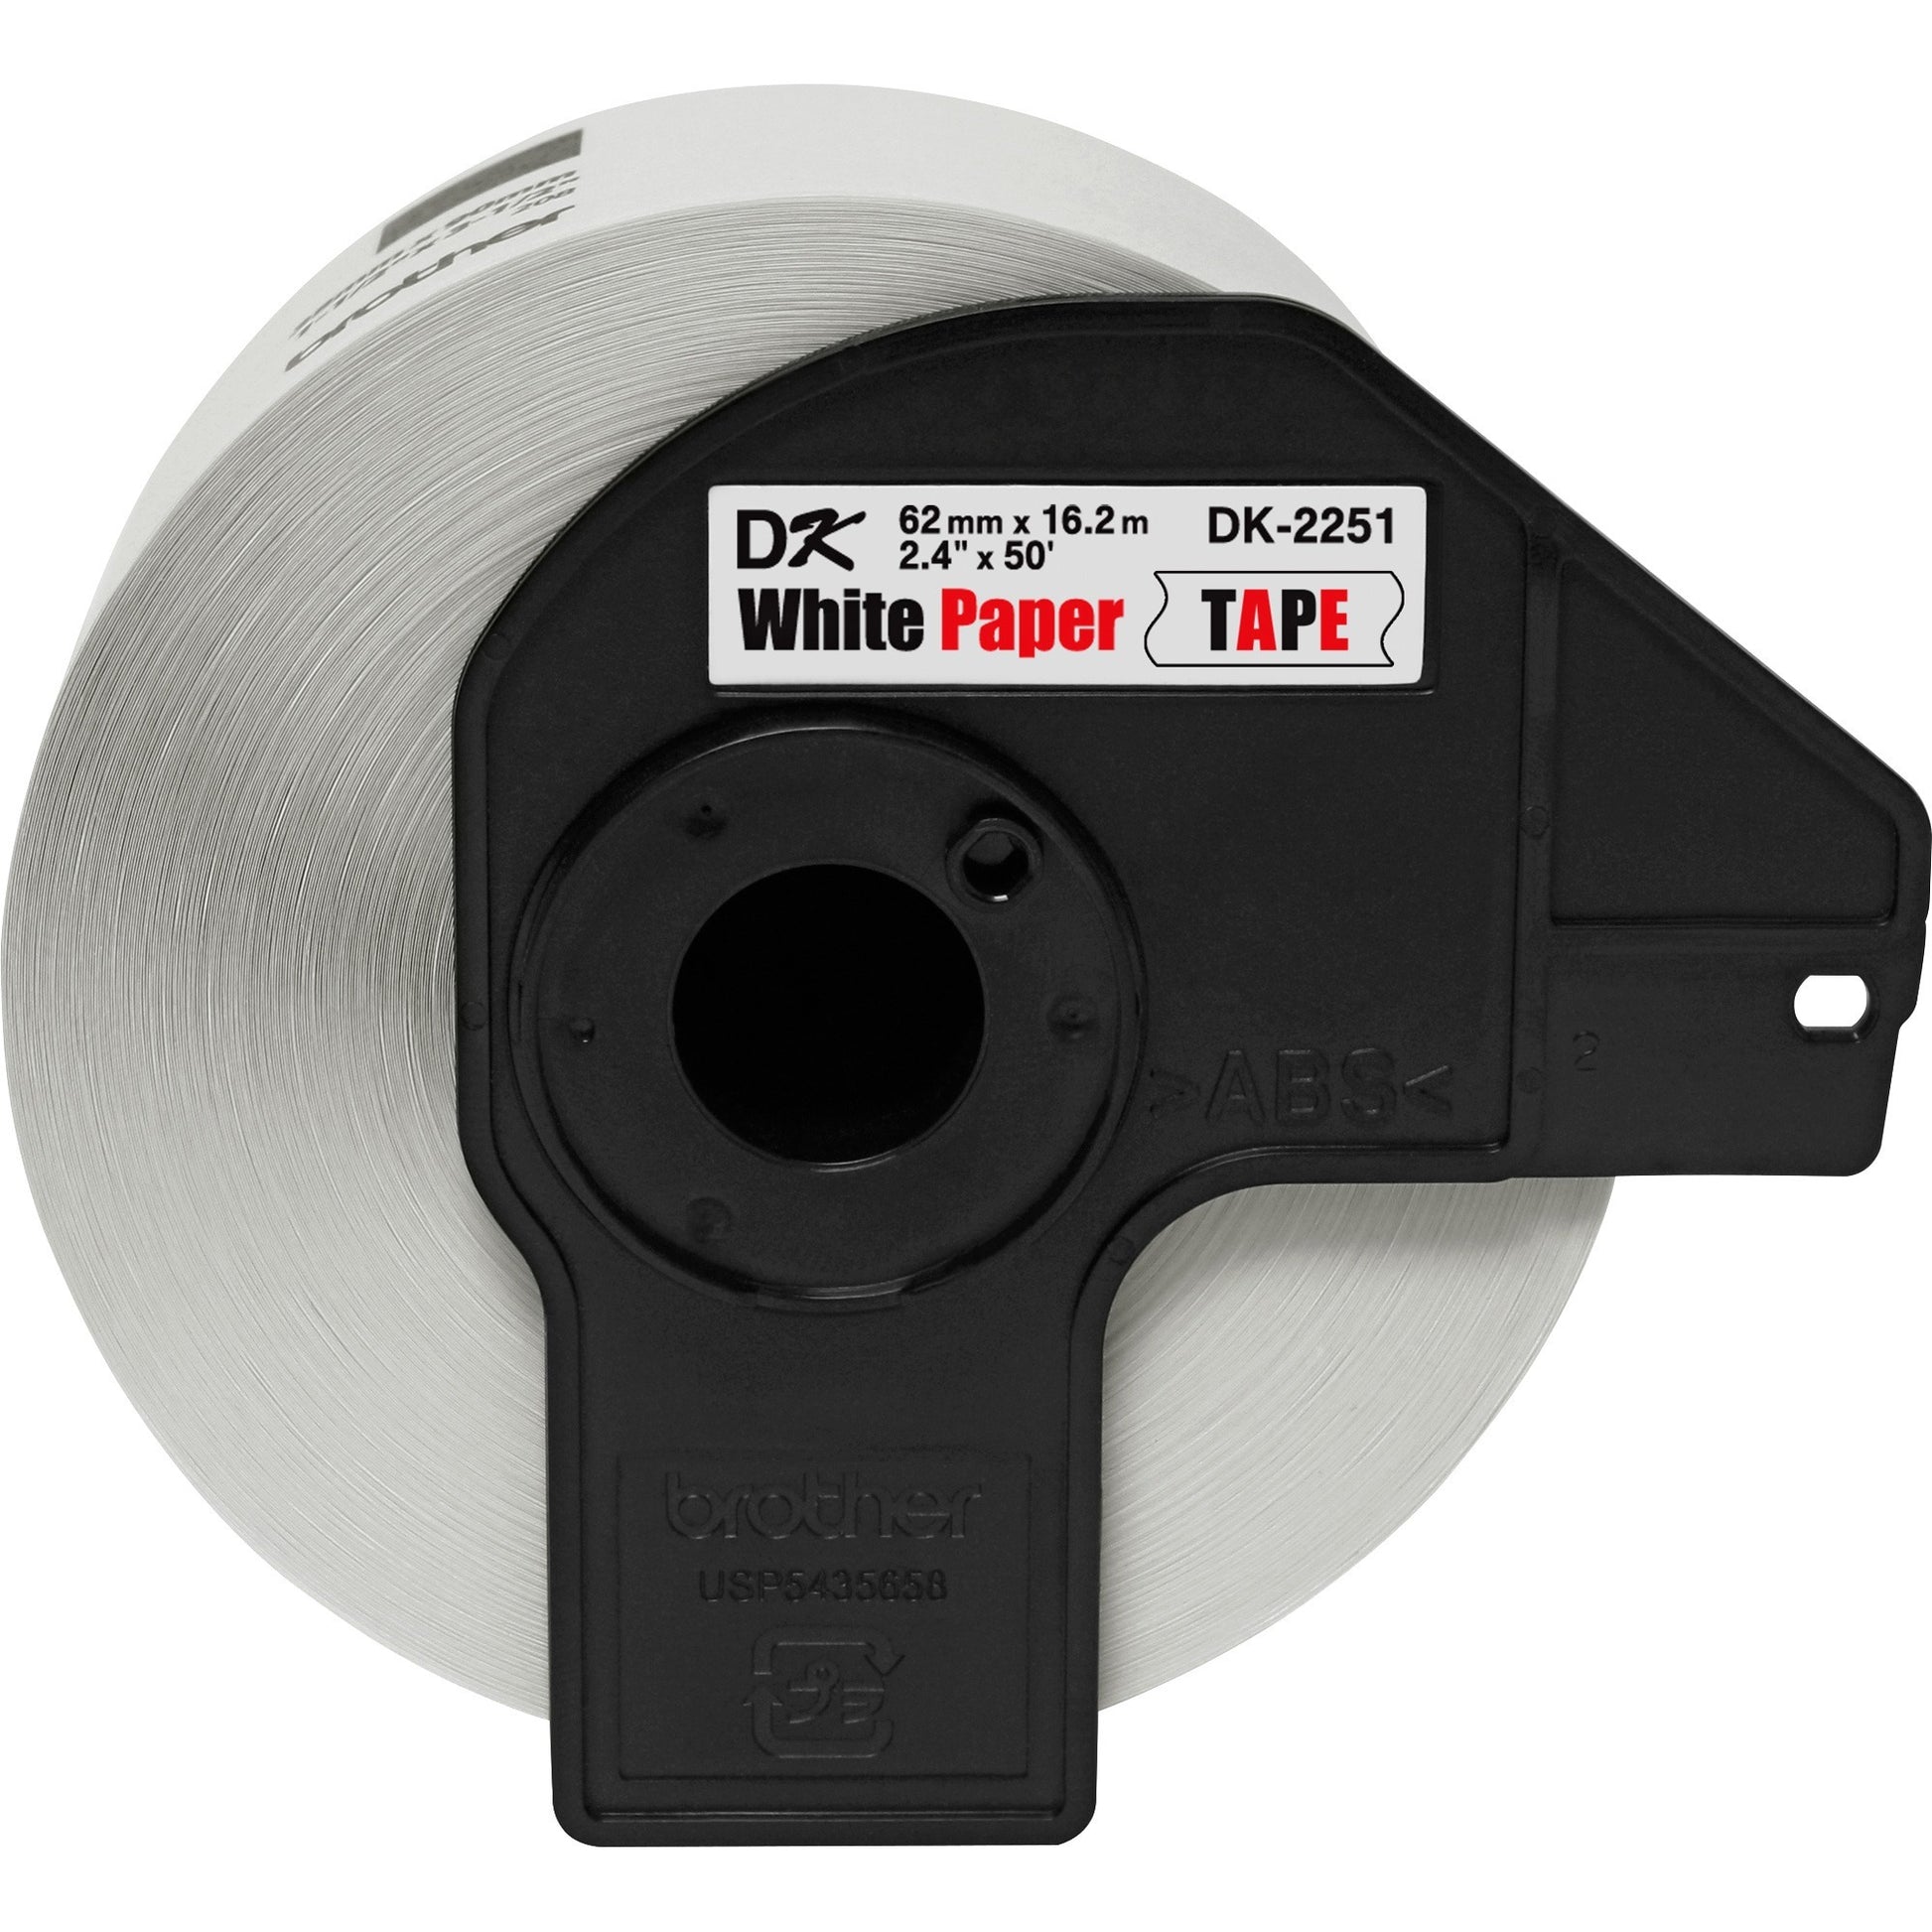 Brother BK/RD on WE Continuous Length Paper Labels